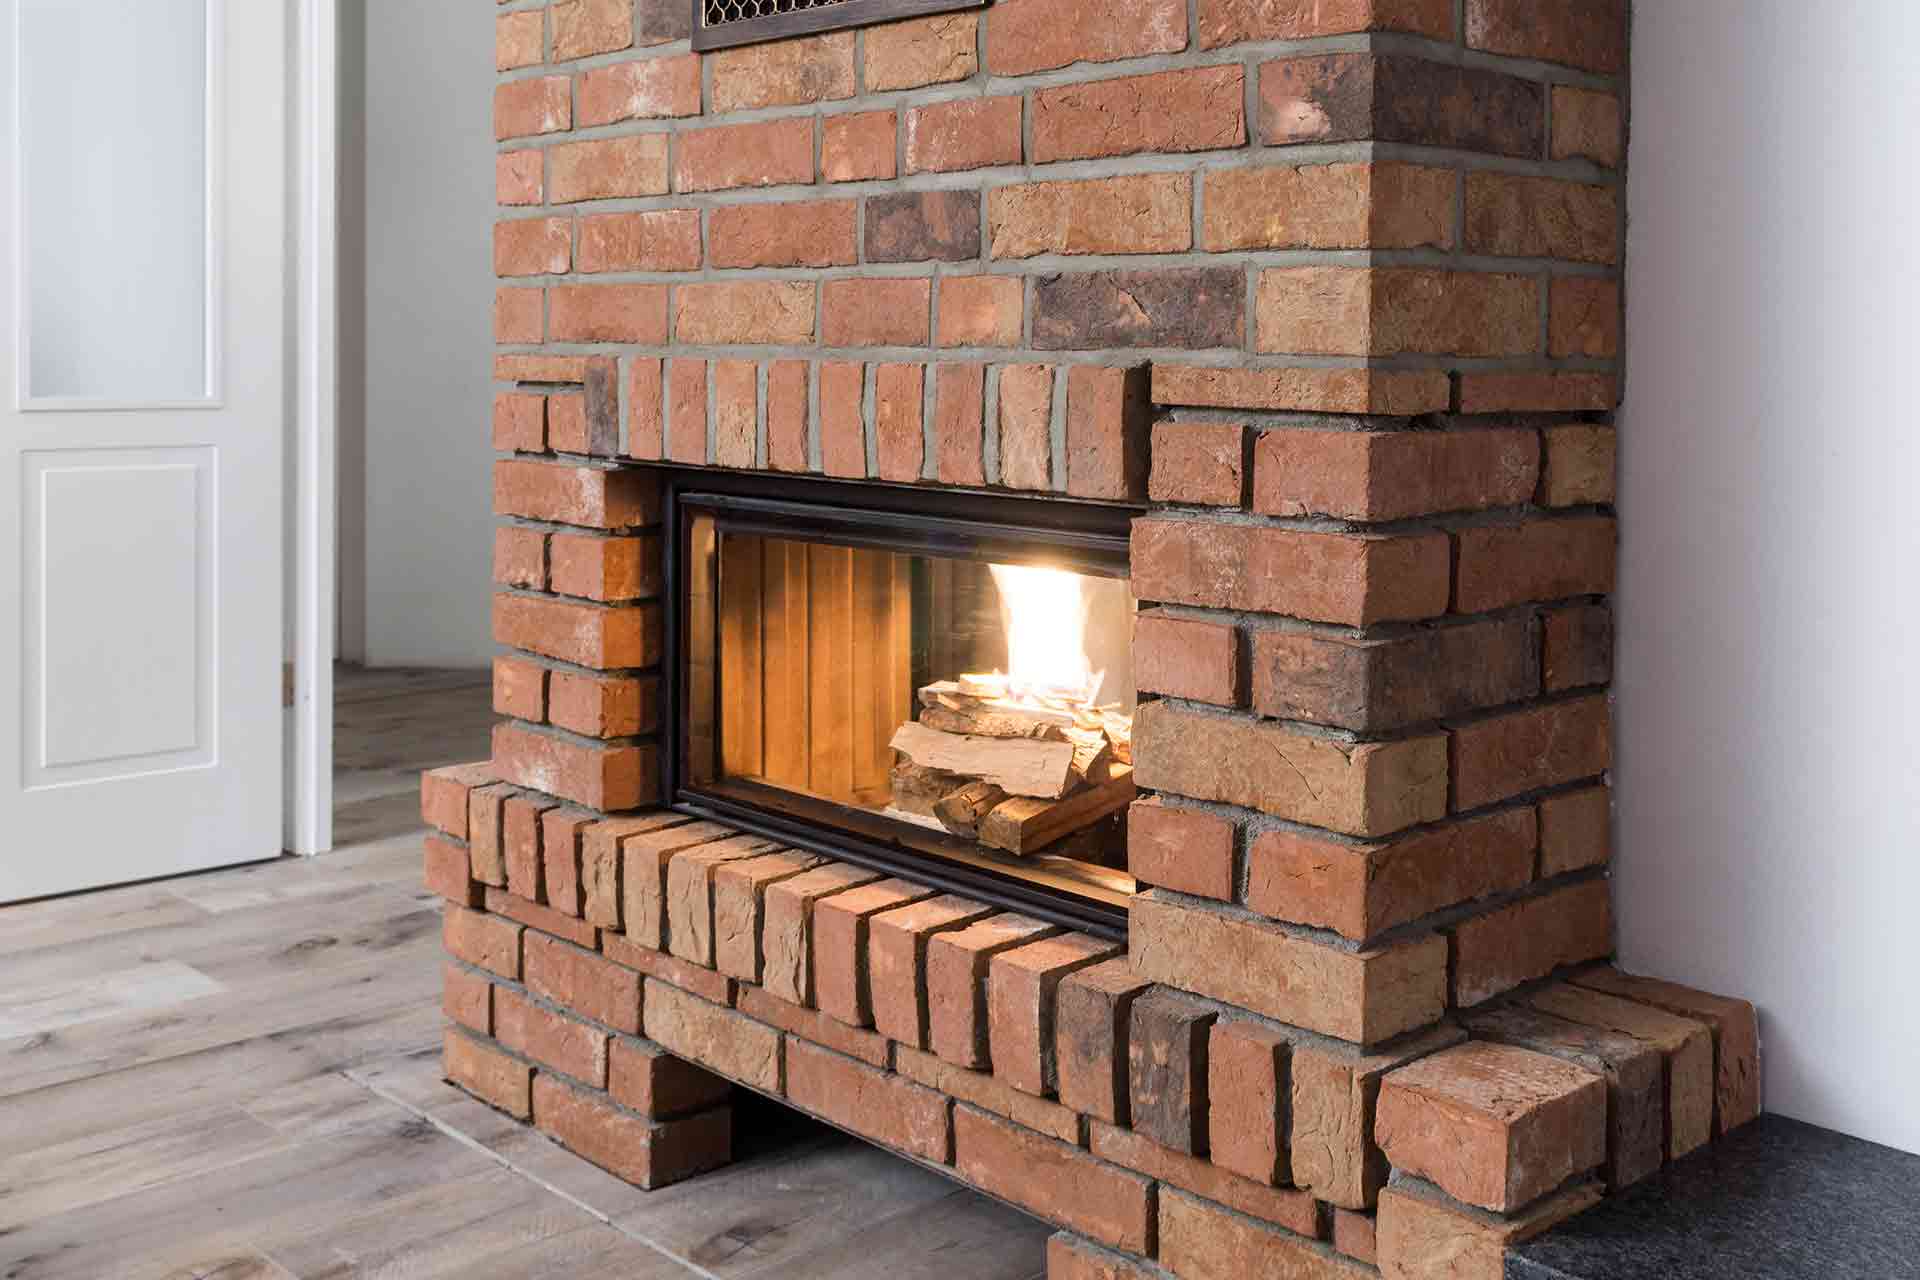 How Much Does It Cost To Install A Fireplace And Chimney